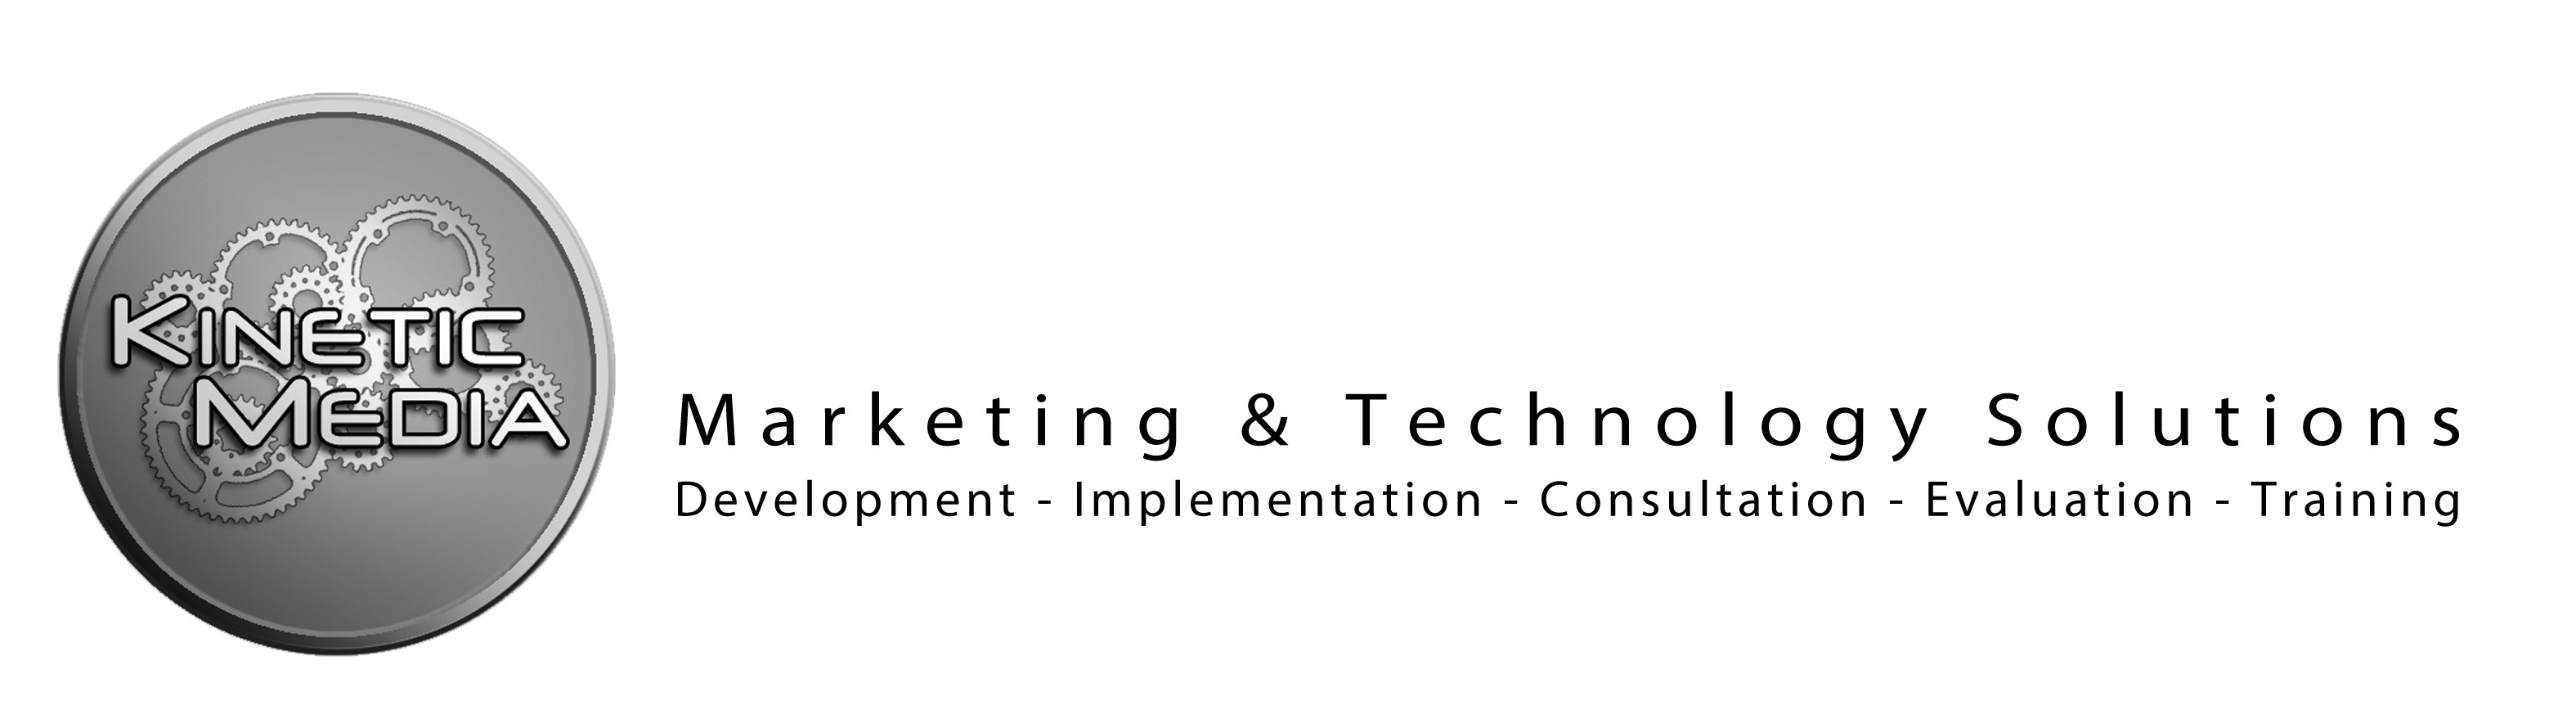 Kinetic Media Marketing And Technology Solutions